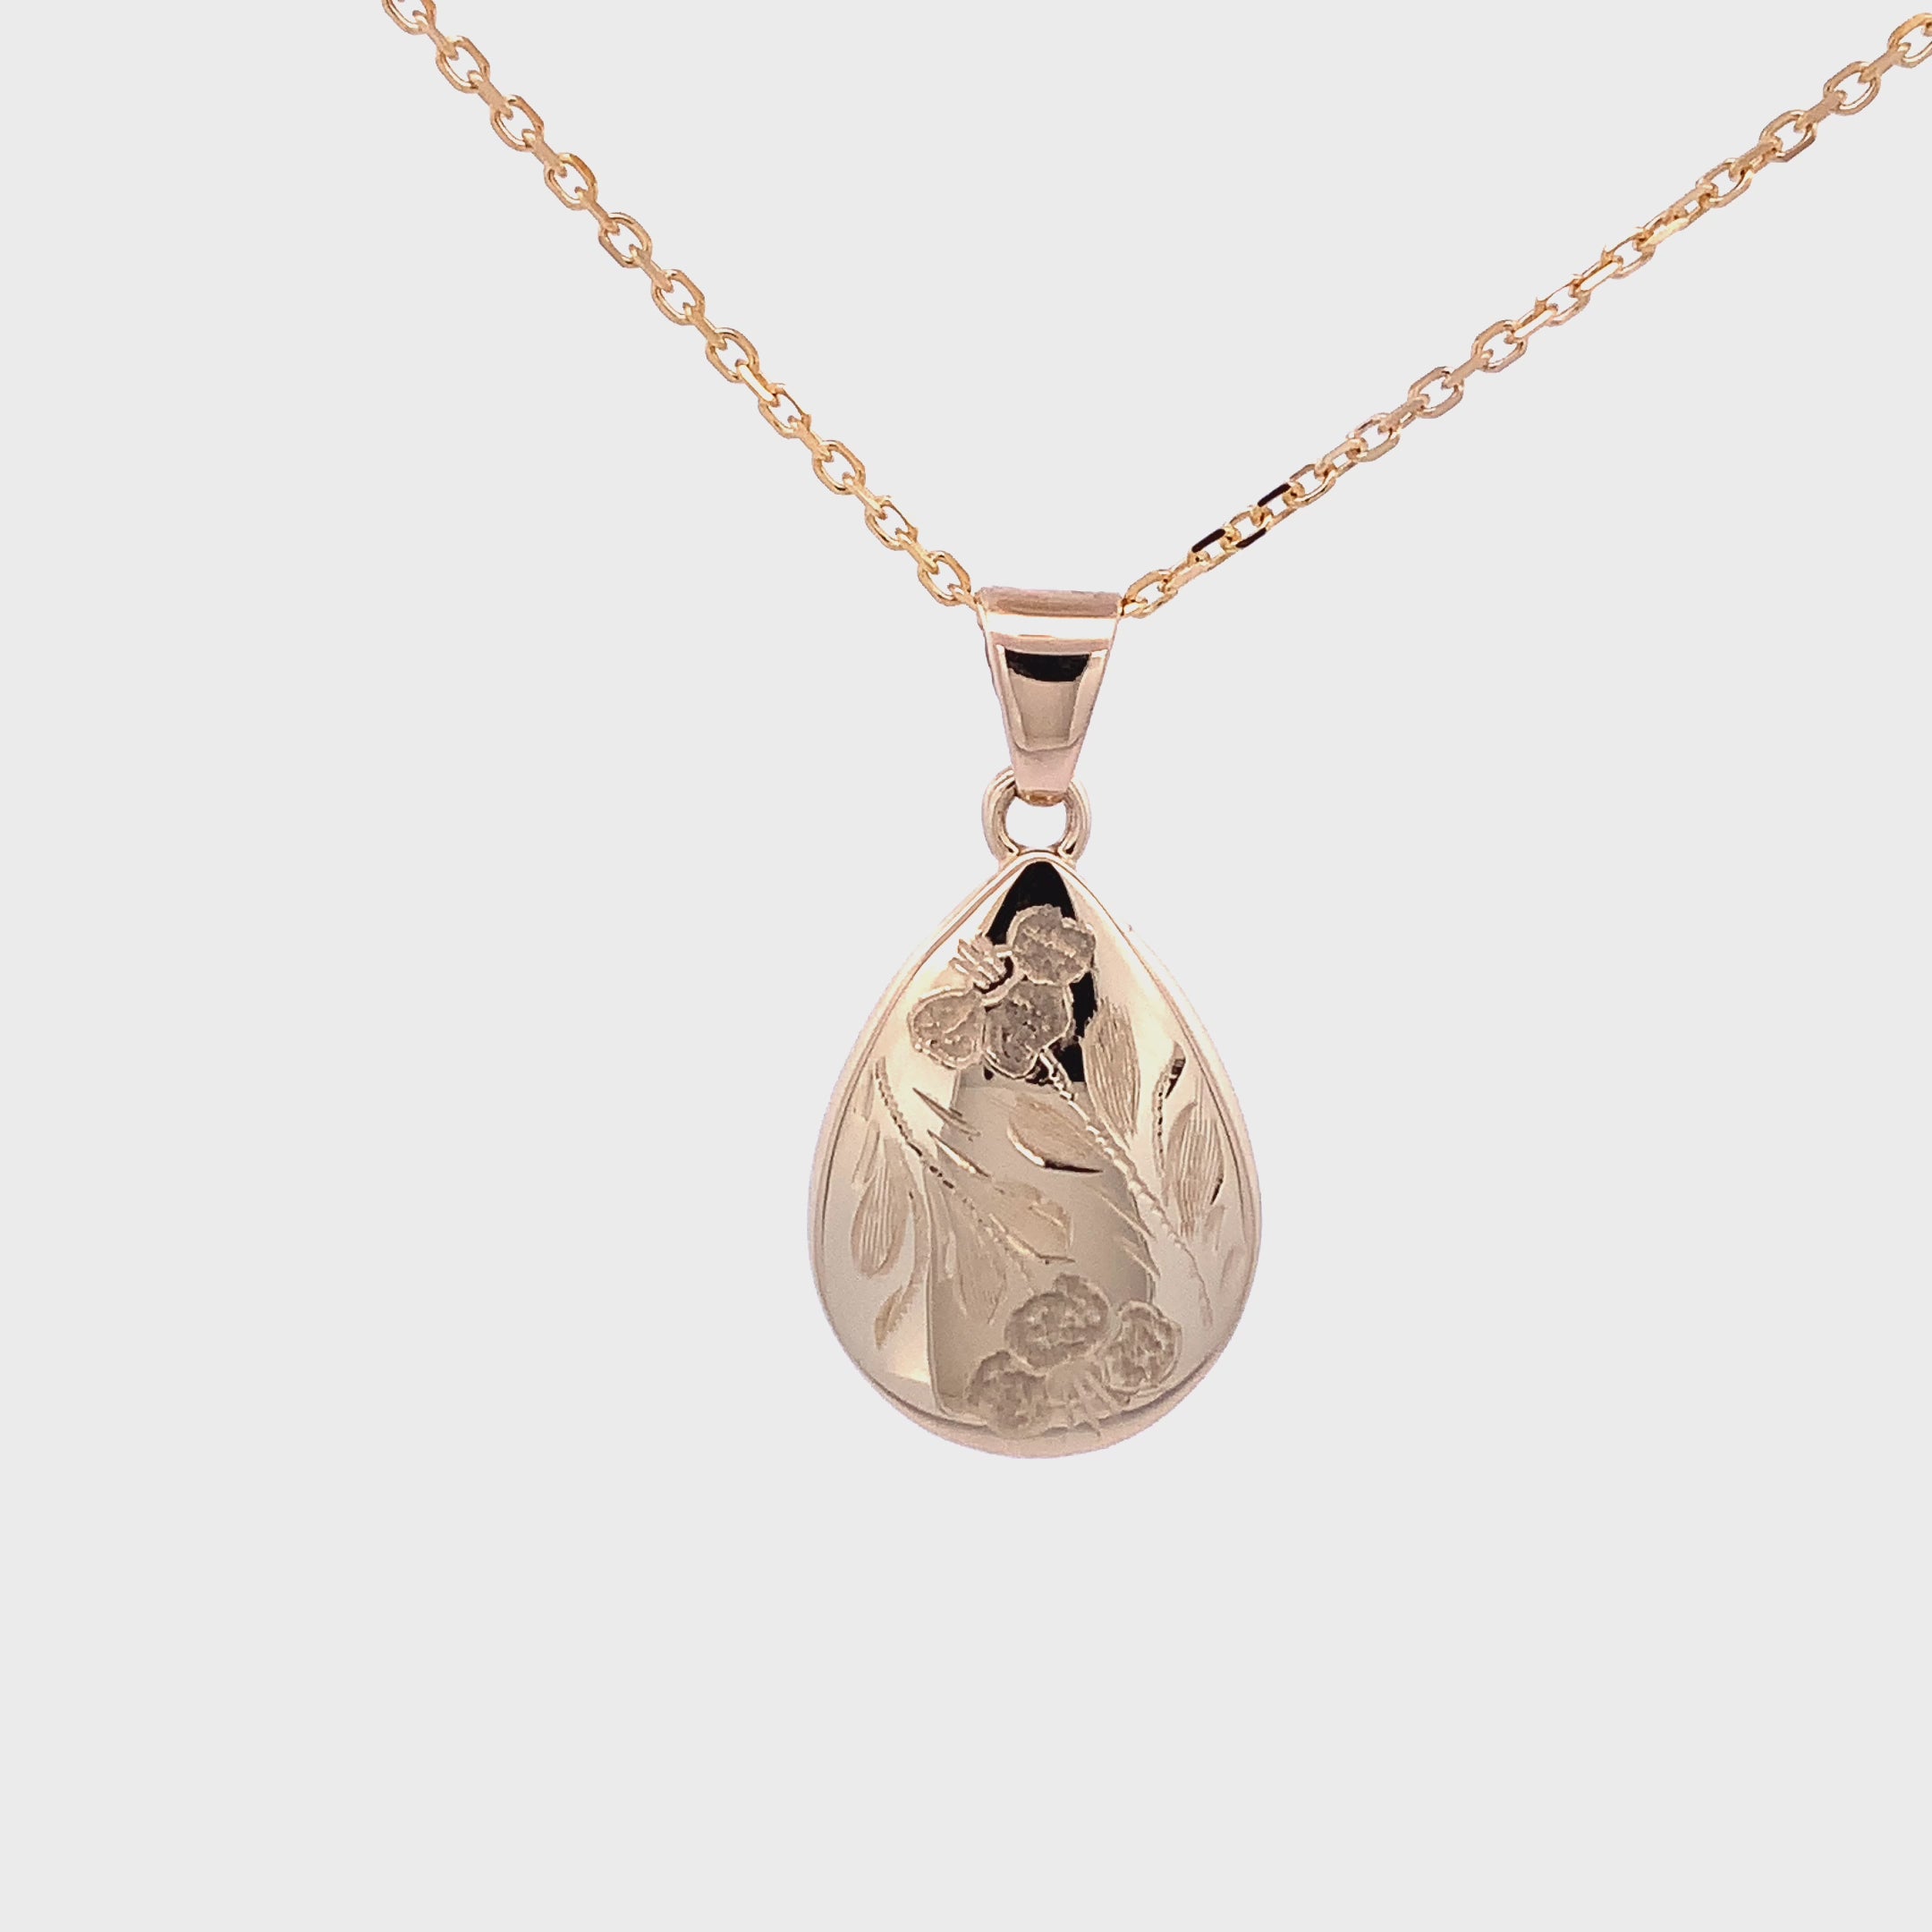 Anavia Memory Teardrop Keepsake Ashes Necklace, Urn Pendant Cremation  Memorial Jewelry, Urn Necklace for Human Ashes - [Silver Necklace] -  Walmart.com